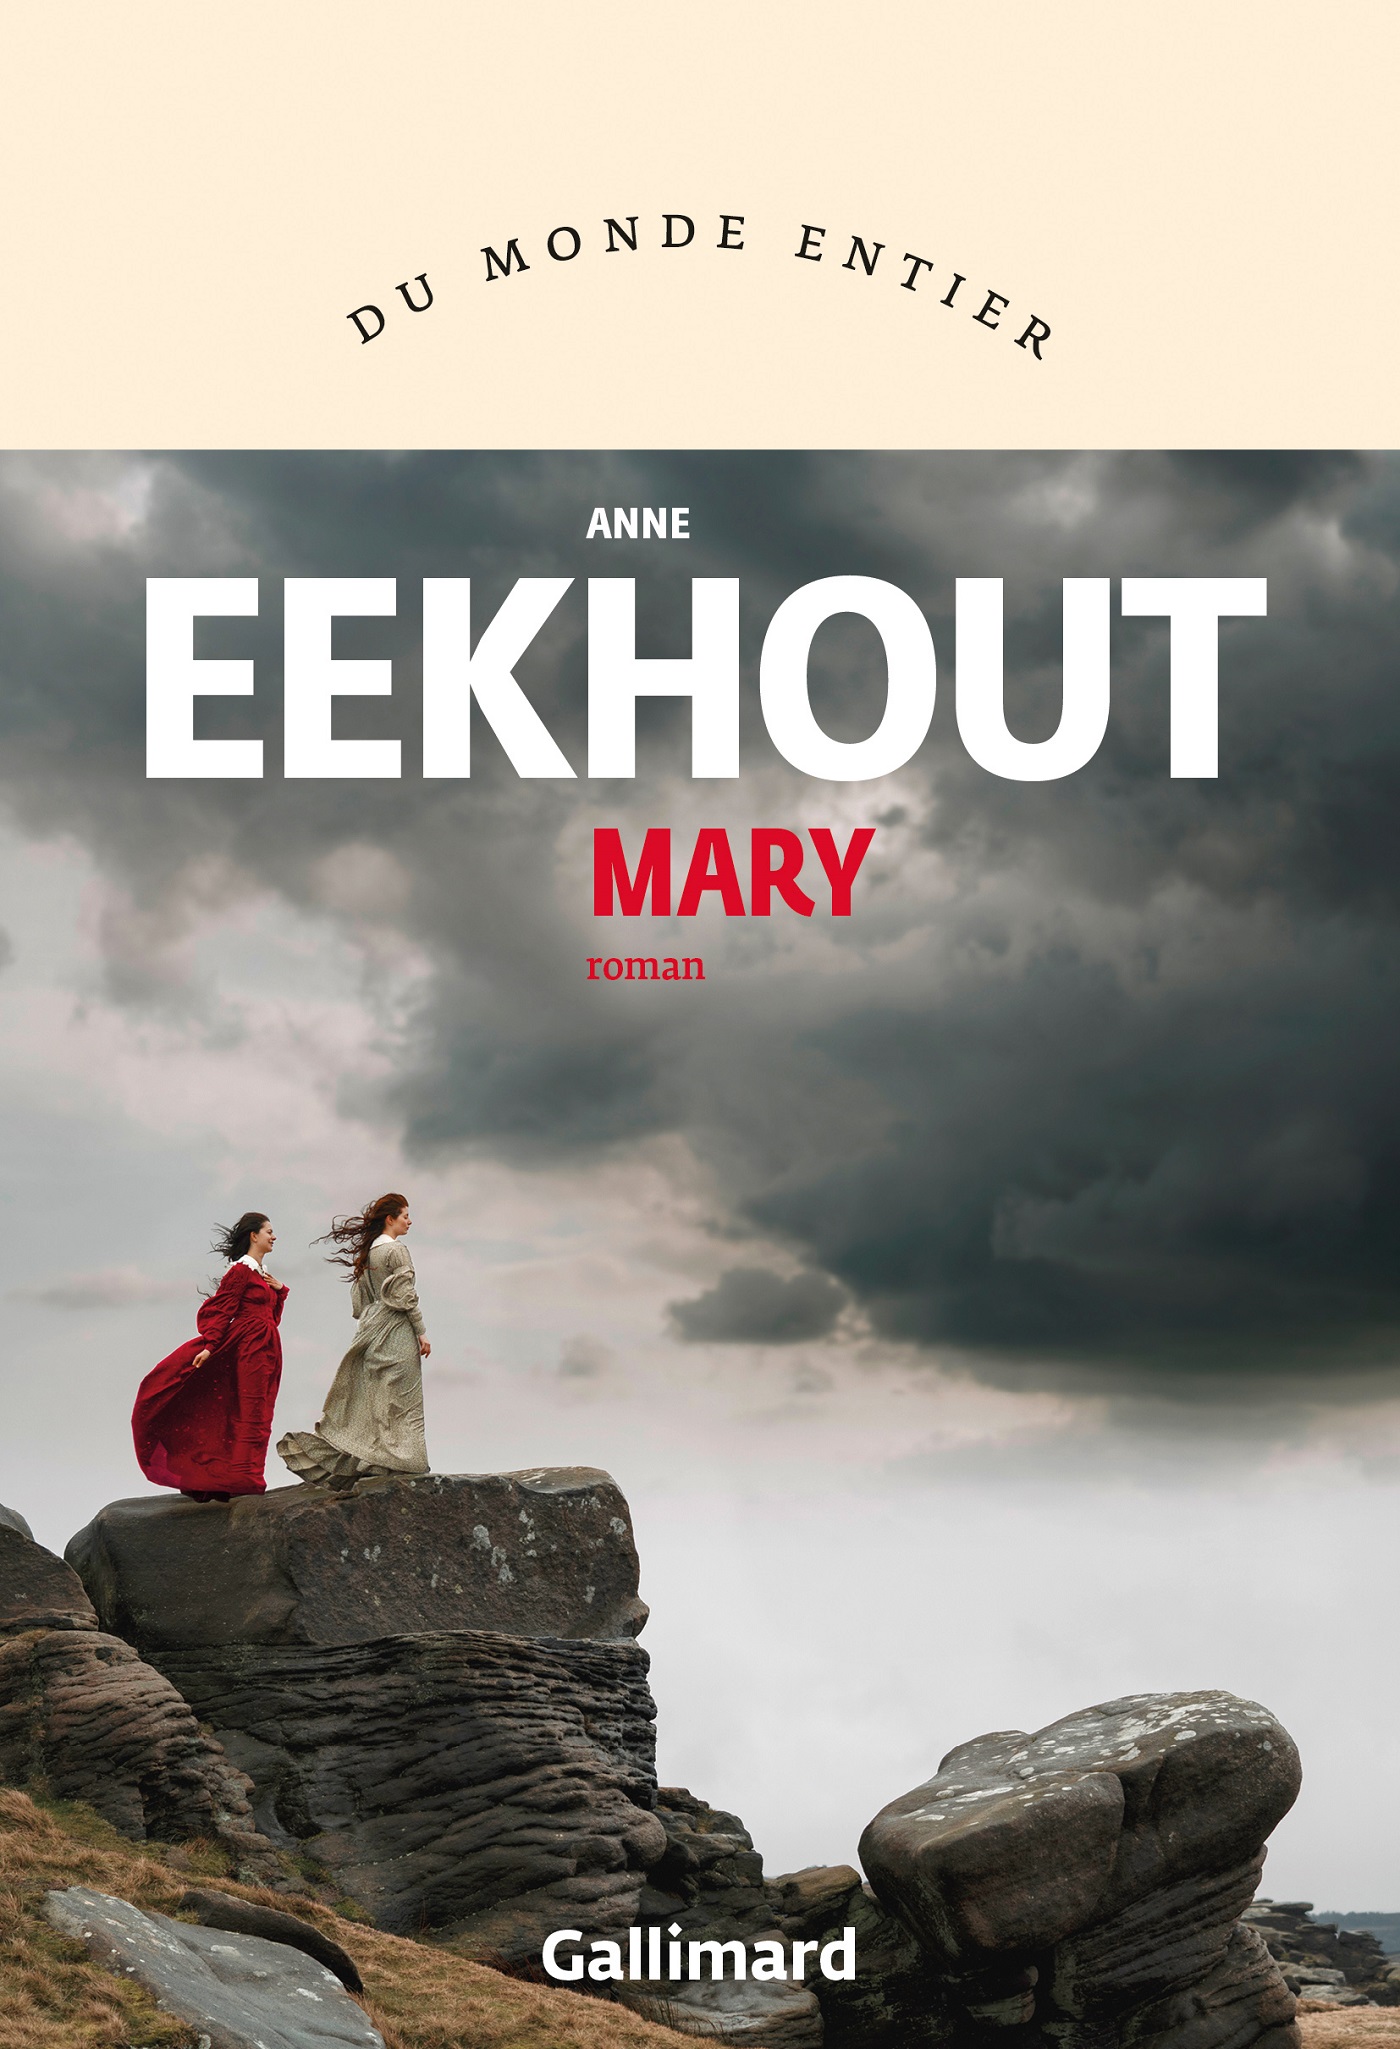 Afficher "Mary"